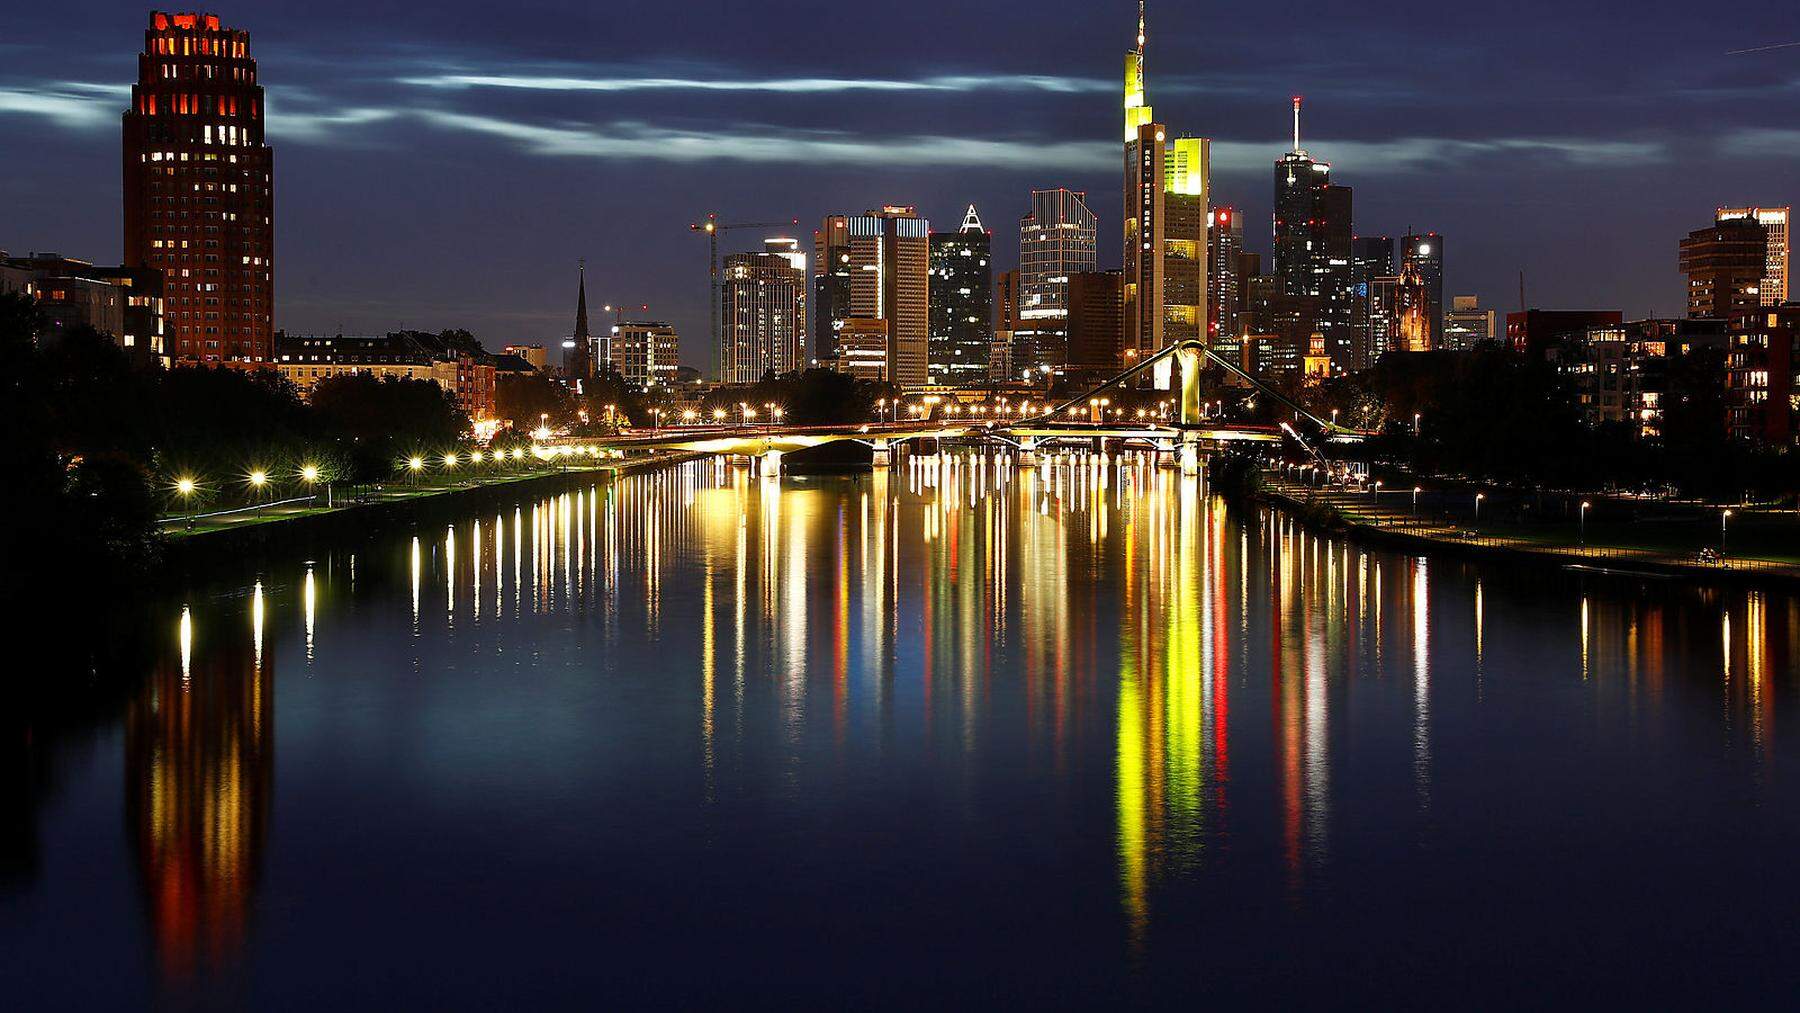 The skyline with its characteristic banking towers is reflected in river Main in Frankfurt